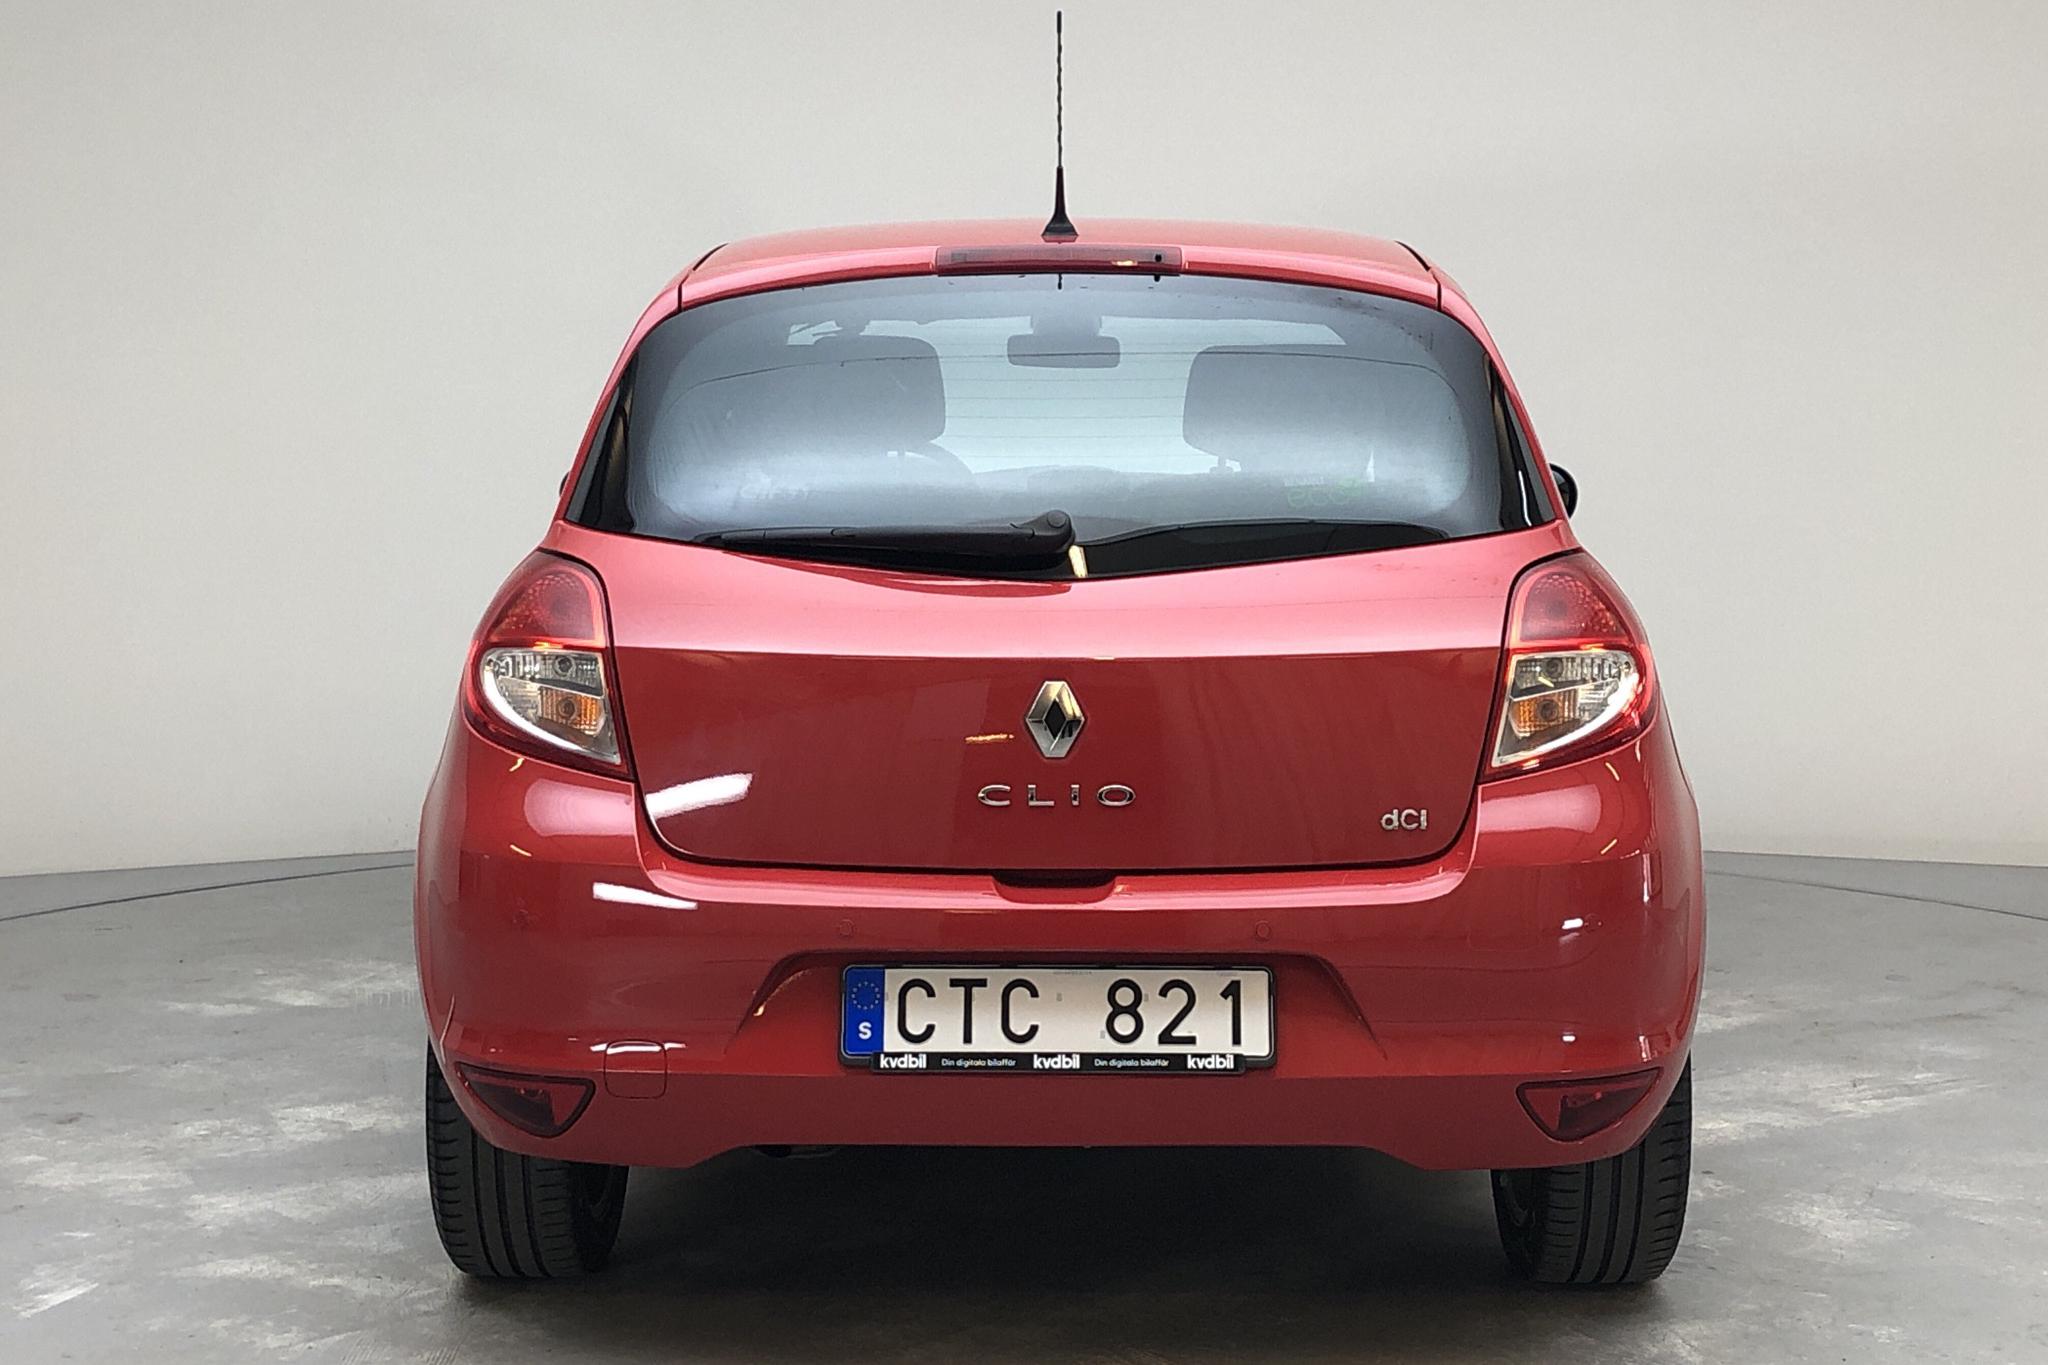 Renault Clio III 1.5 dCi 5dr (88hk) - 66 970 km - Manual - red - 2012